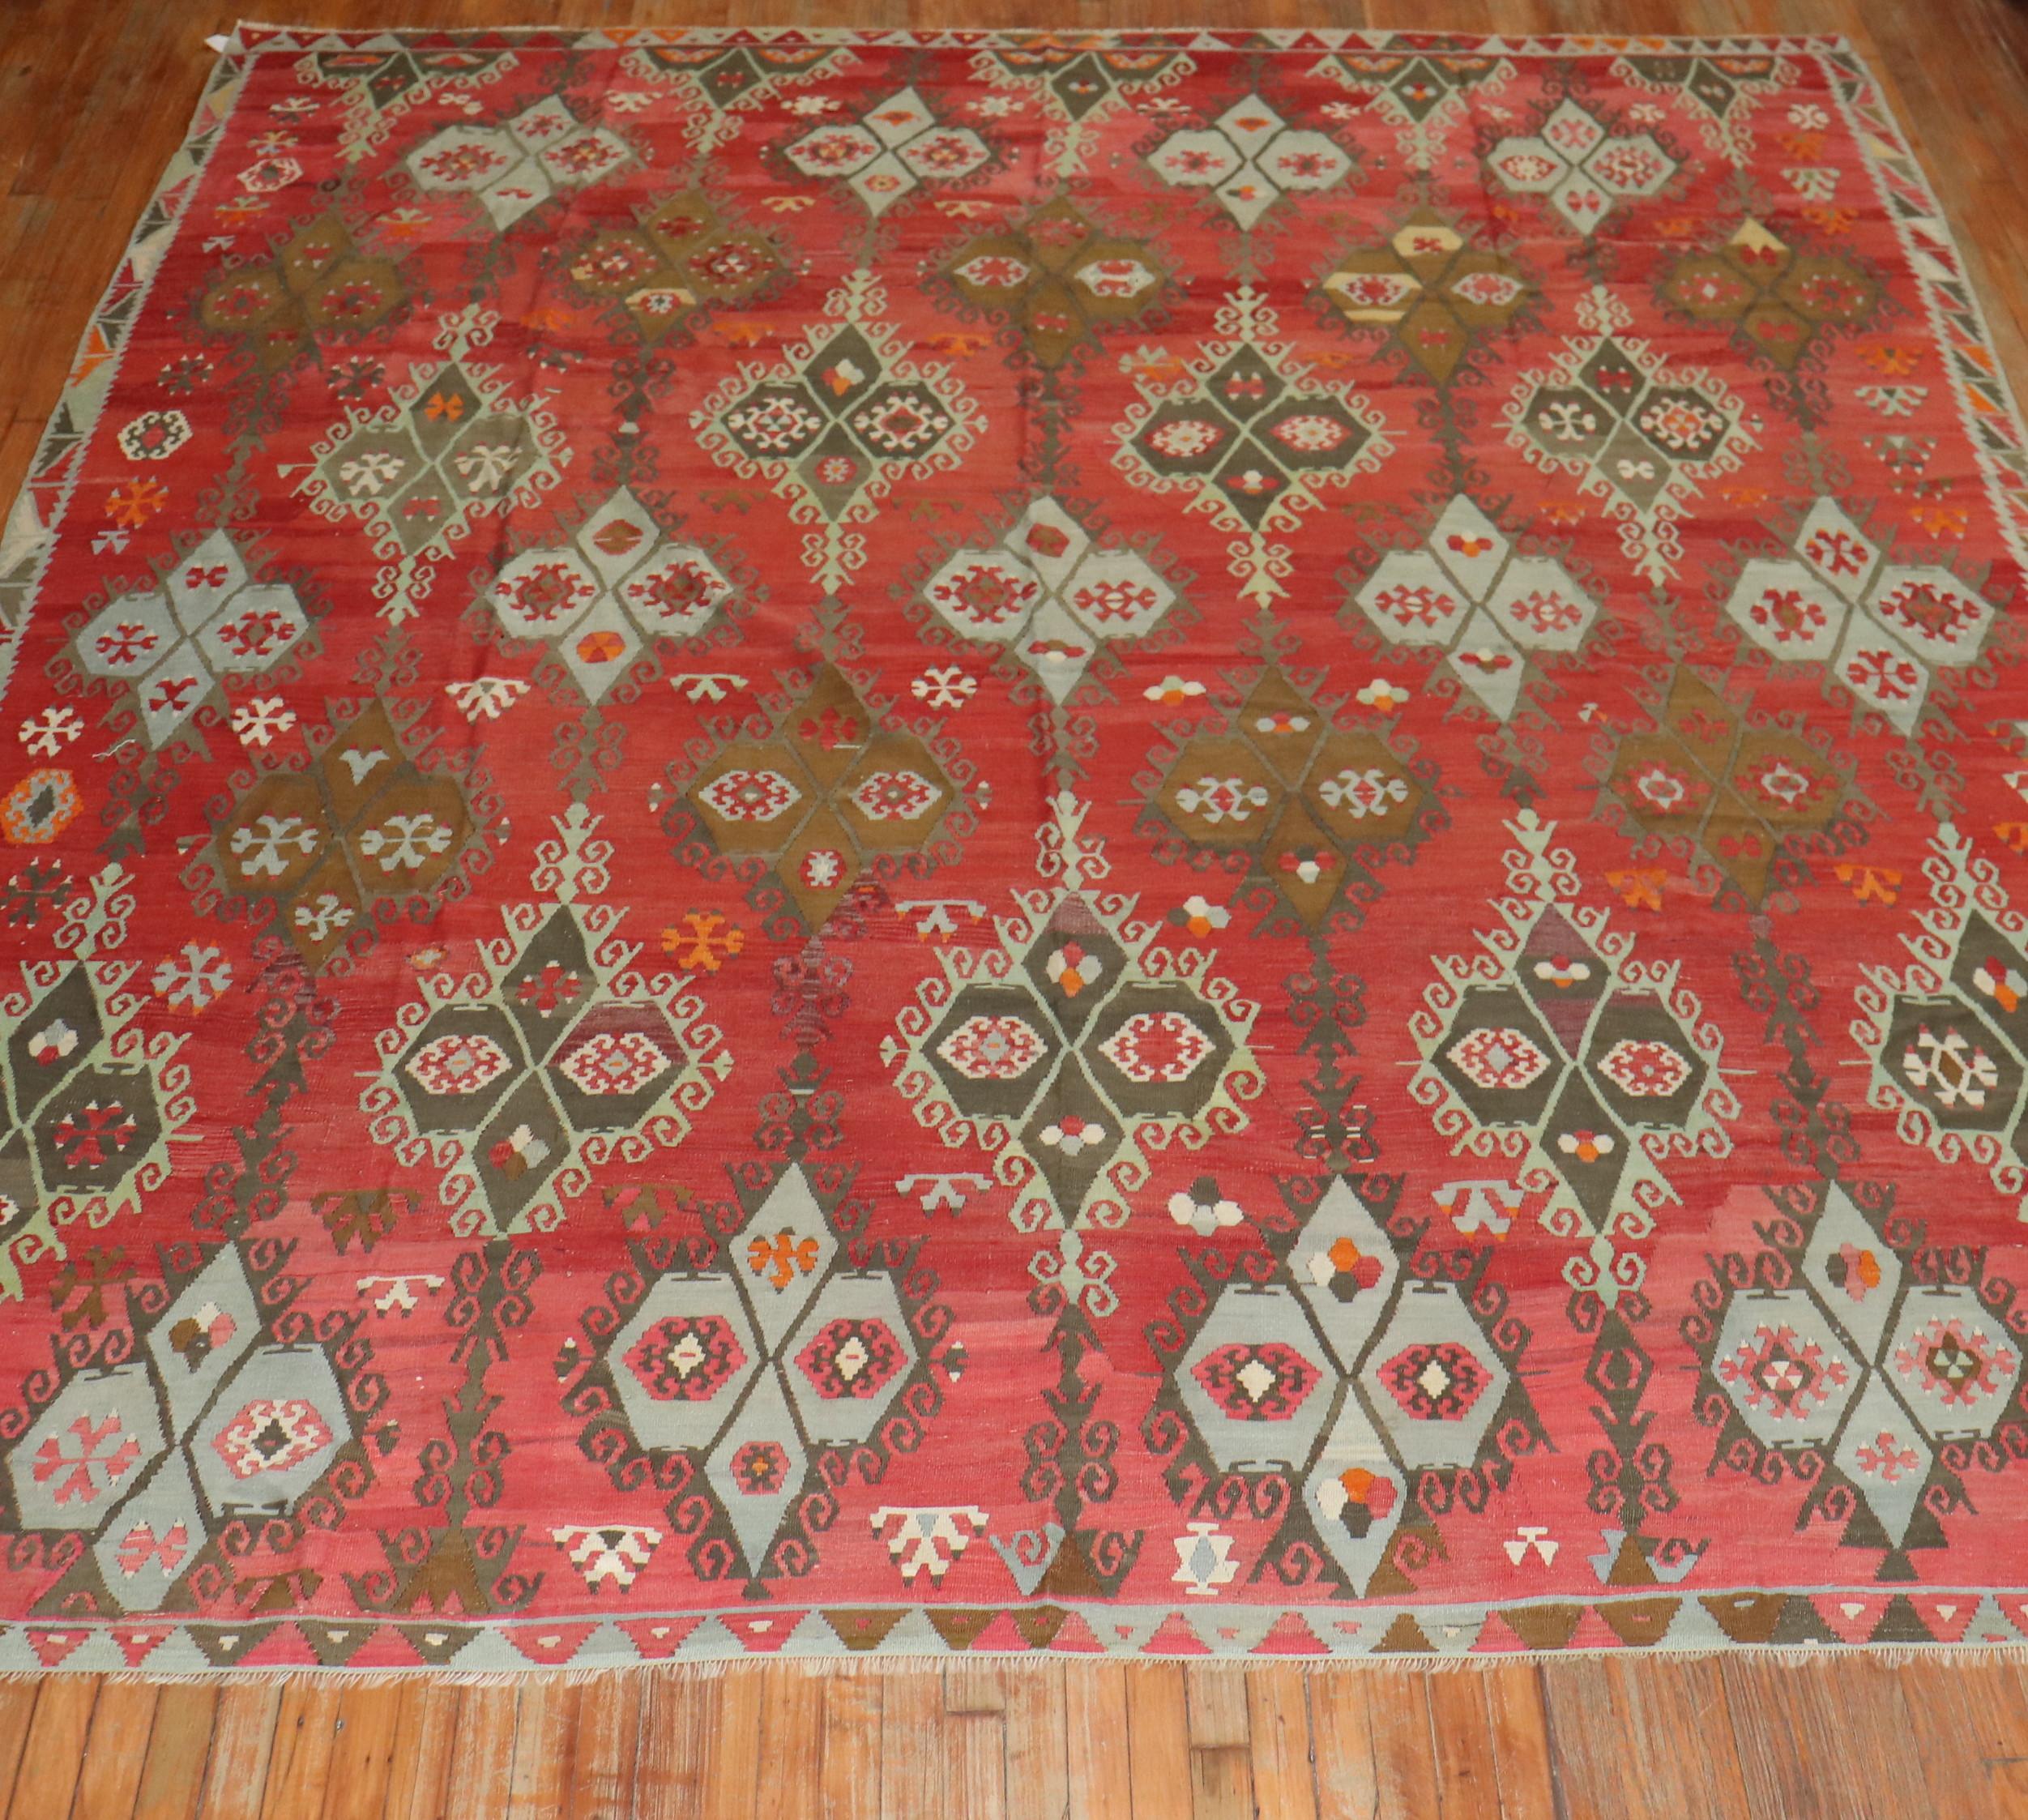 A fascinating Turkish Kilim flat-weave featuring a large scale all-over geometric and floral design on a striated red field,

circa 1900, measures: 9'9